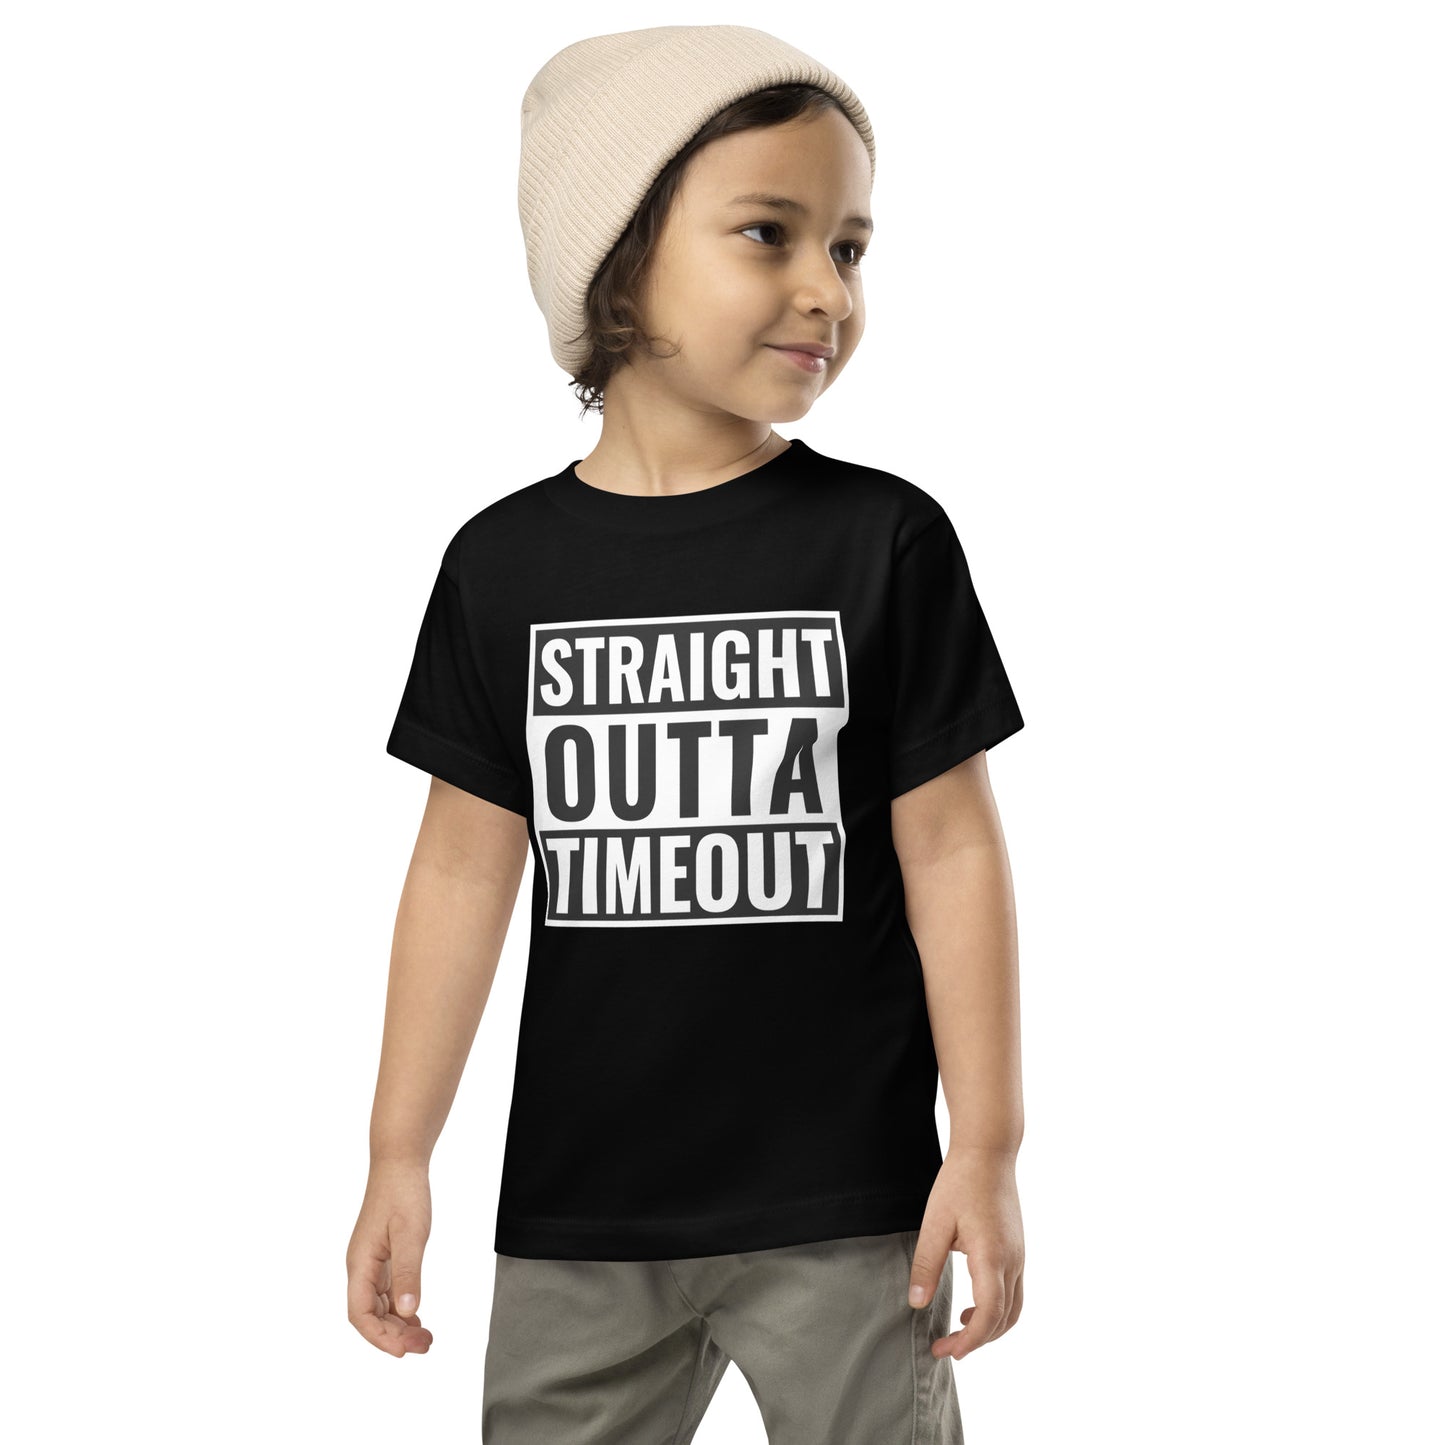 STRAIGHT OUTTA TIMEOUT Toddler Short Sleeve Tee